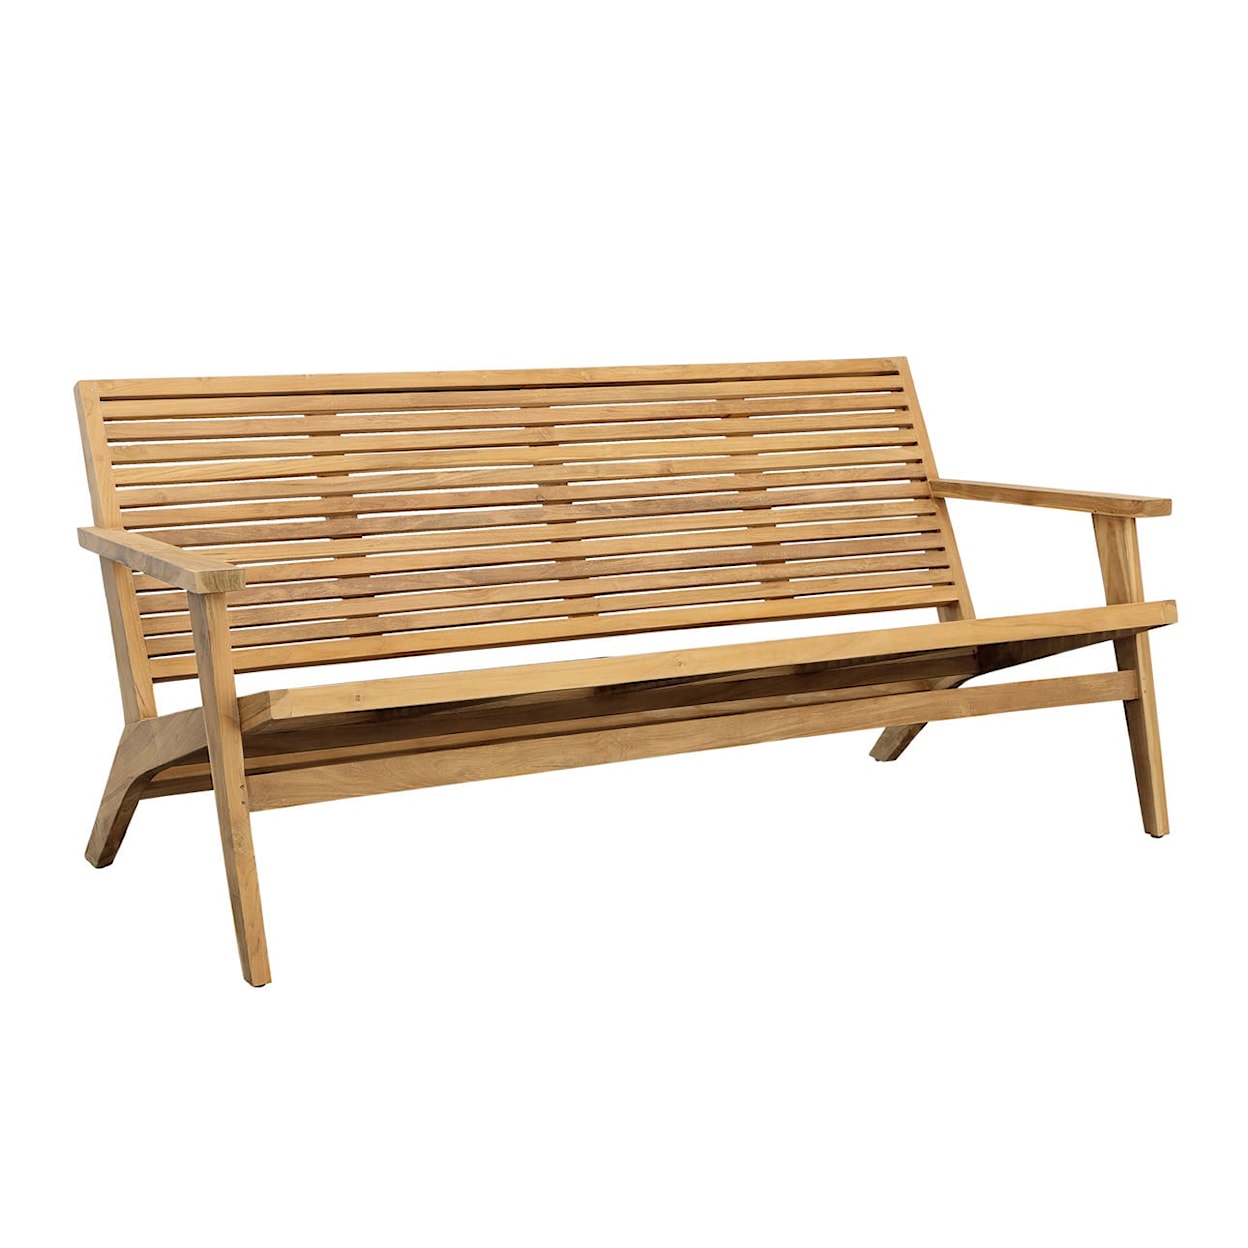 Dovetail Furniture Janine Outdoor Bench